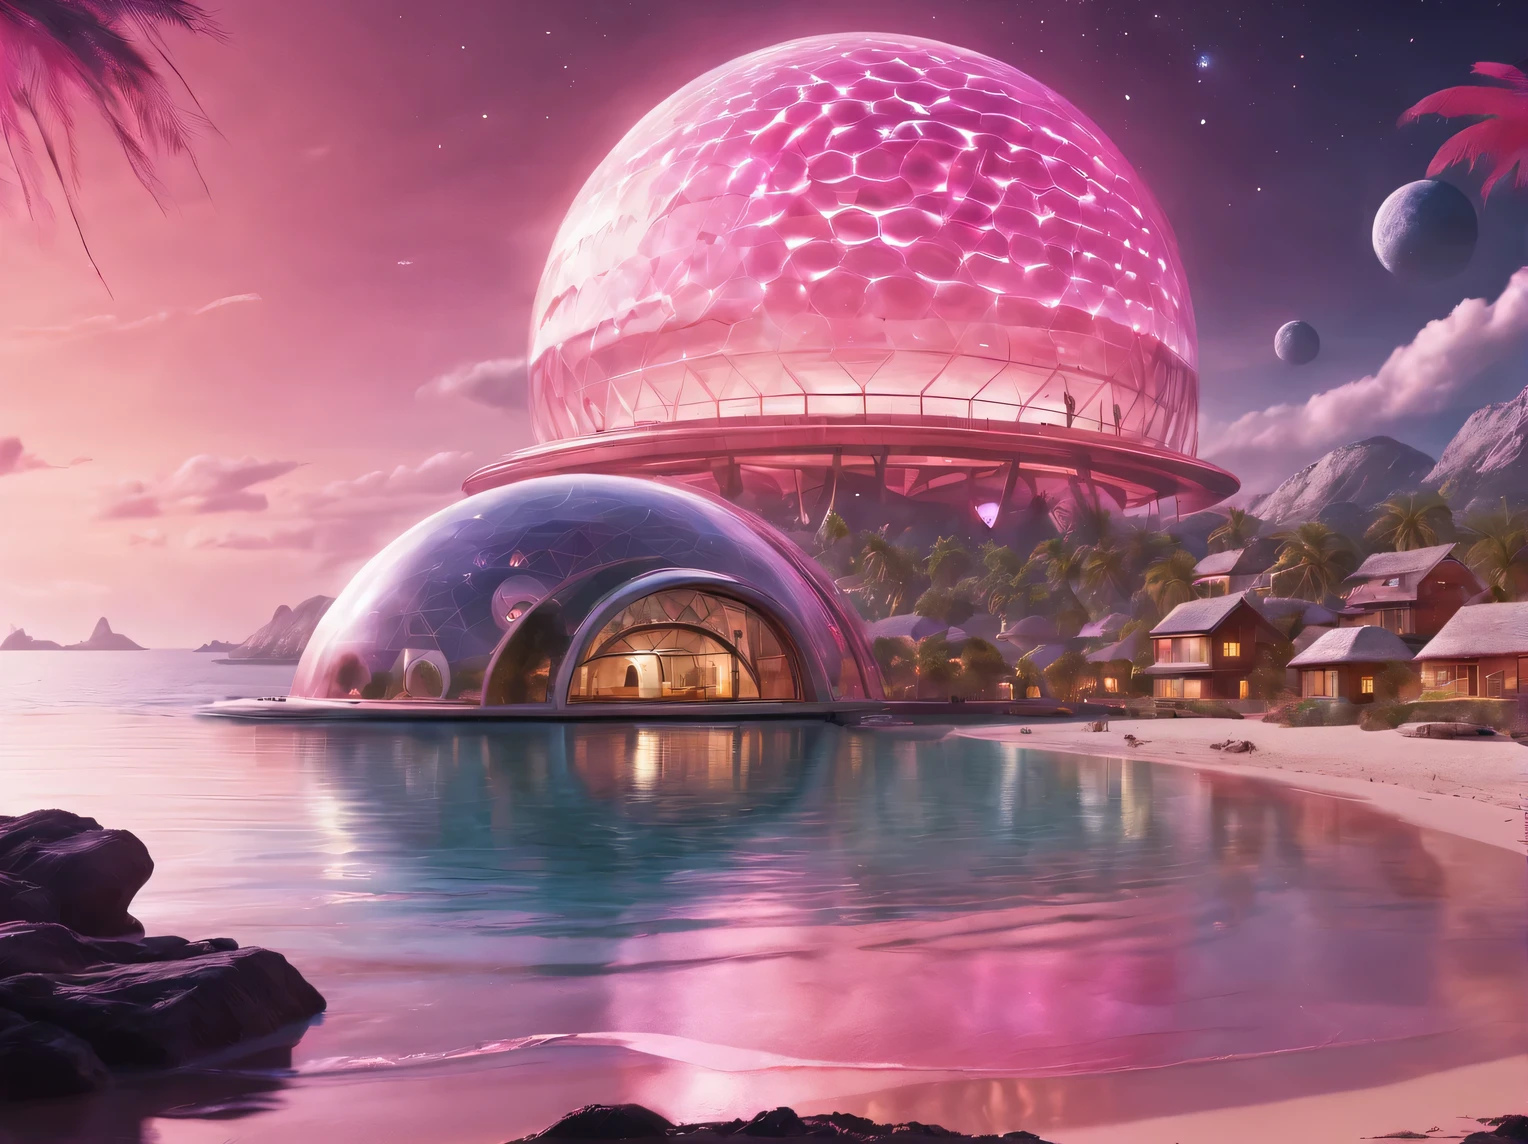 scene from a holiday romance on the shore of an alien pink ocean, in the background is an alien eco-friendly resort town under an energy dome, stars are visible in the dark sky behind the dome